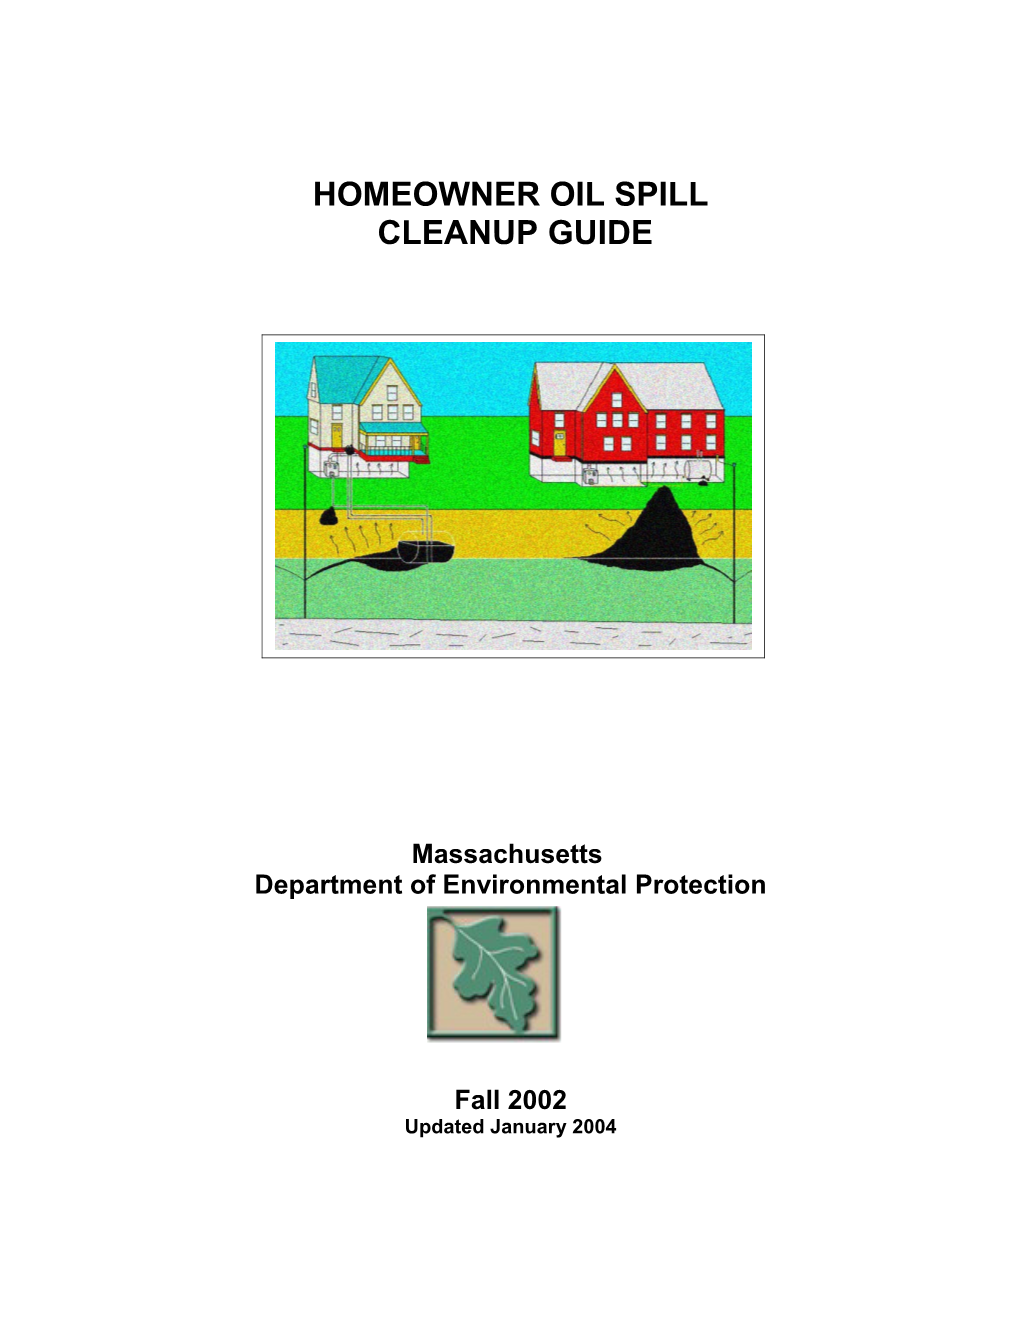 Homeowner Oil Spill Cleanup Guide